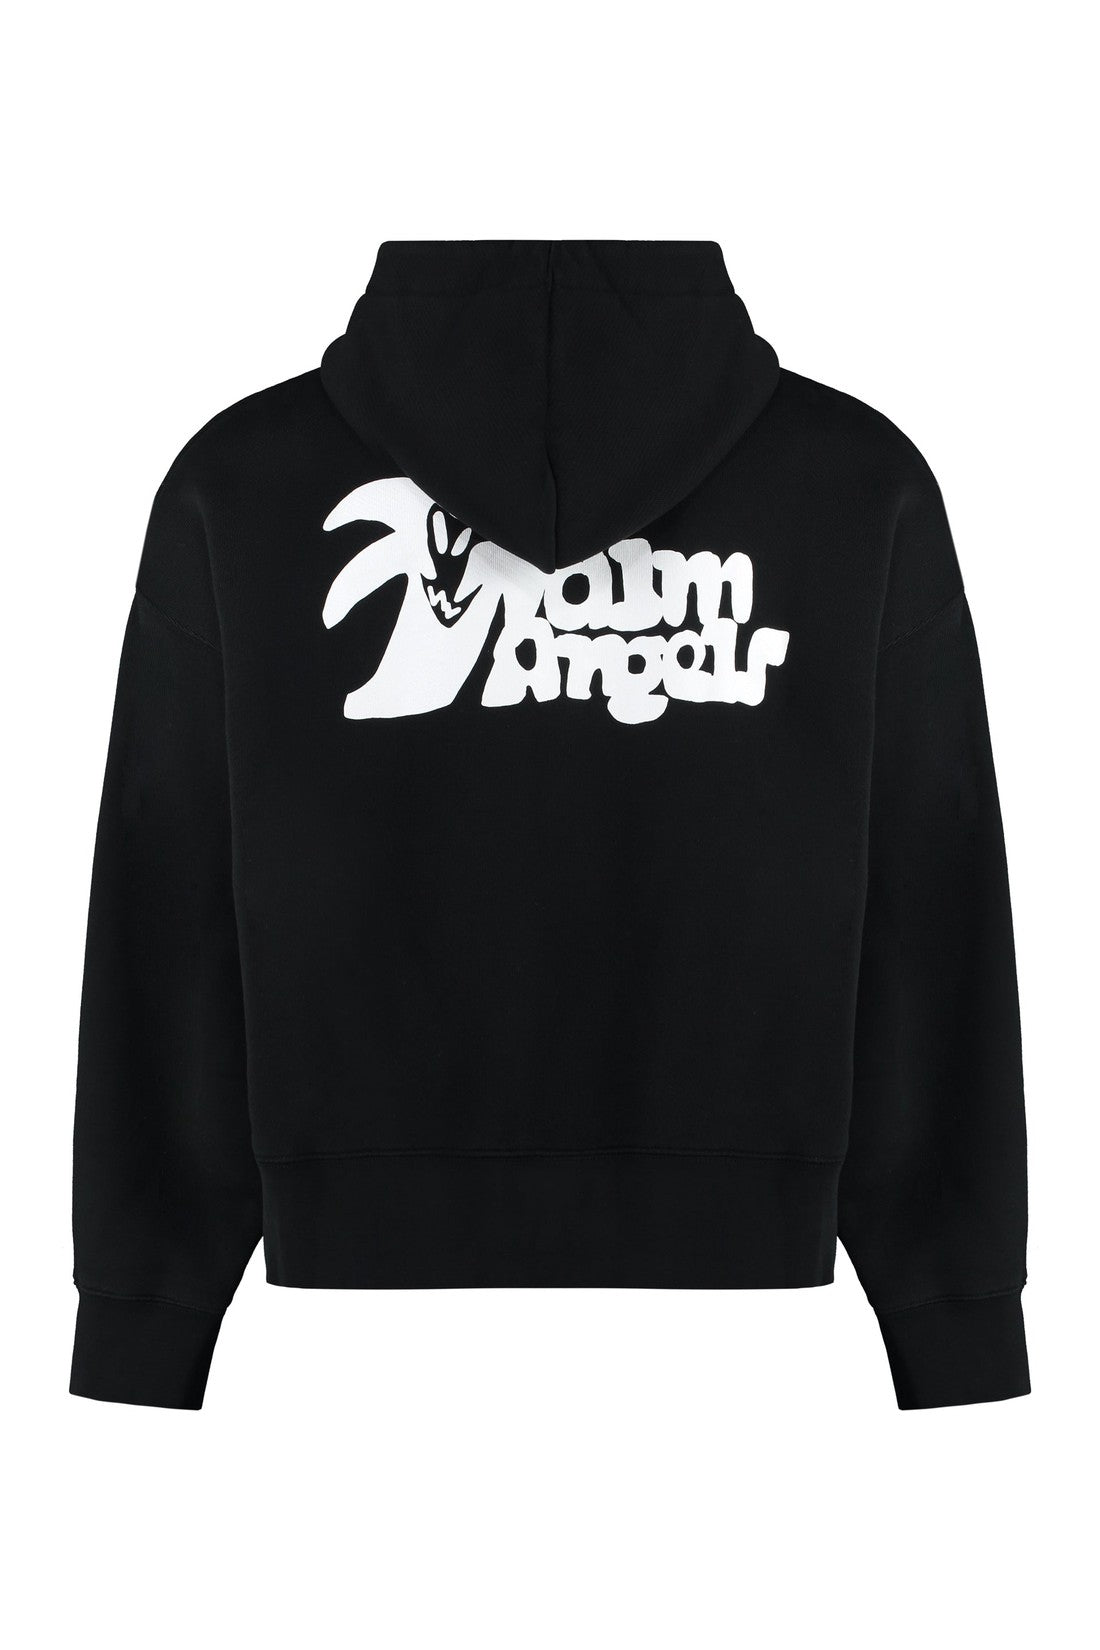 Palm Angels-OUTLET-SALE-Full zip hoodie-ARCHIVIST